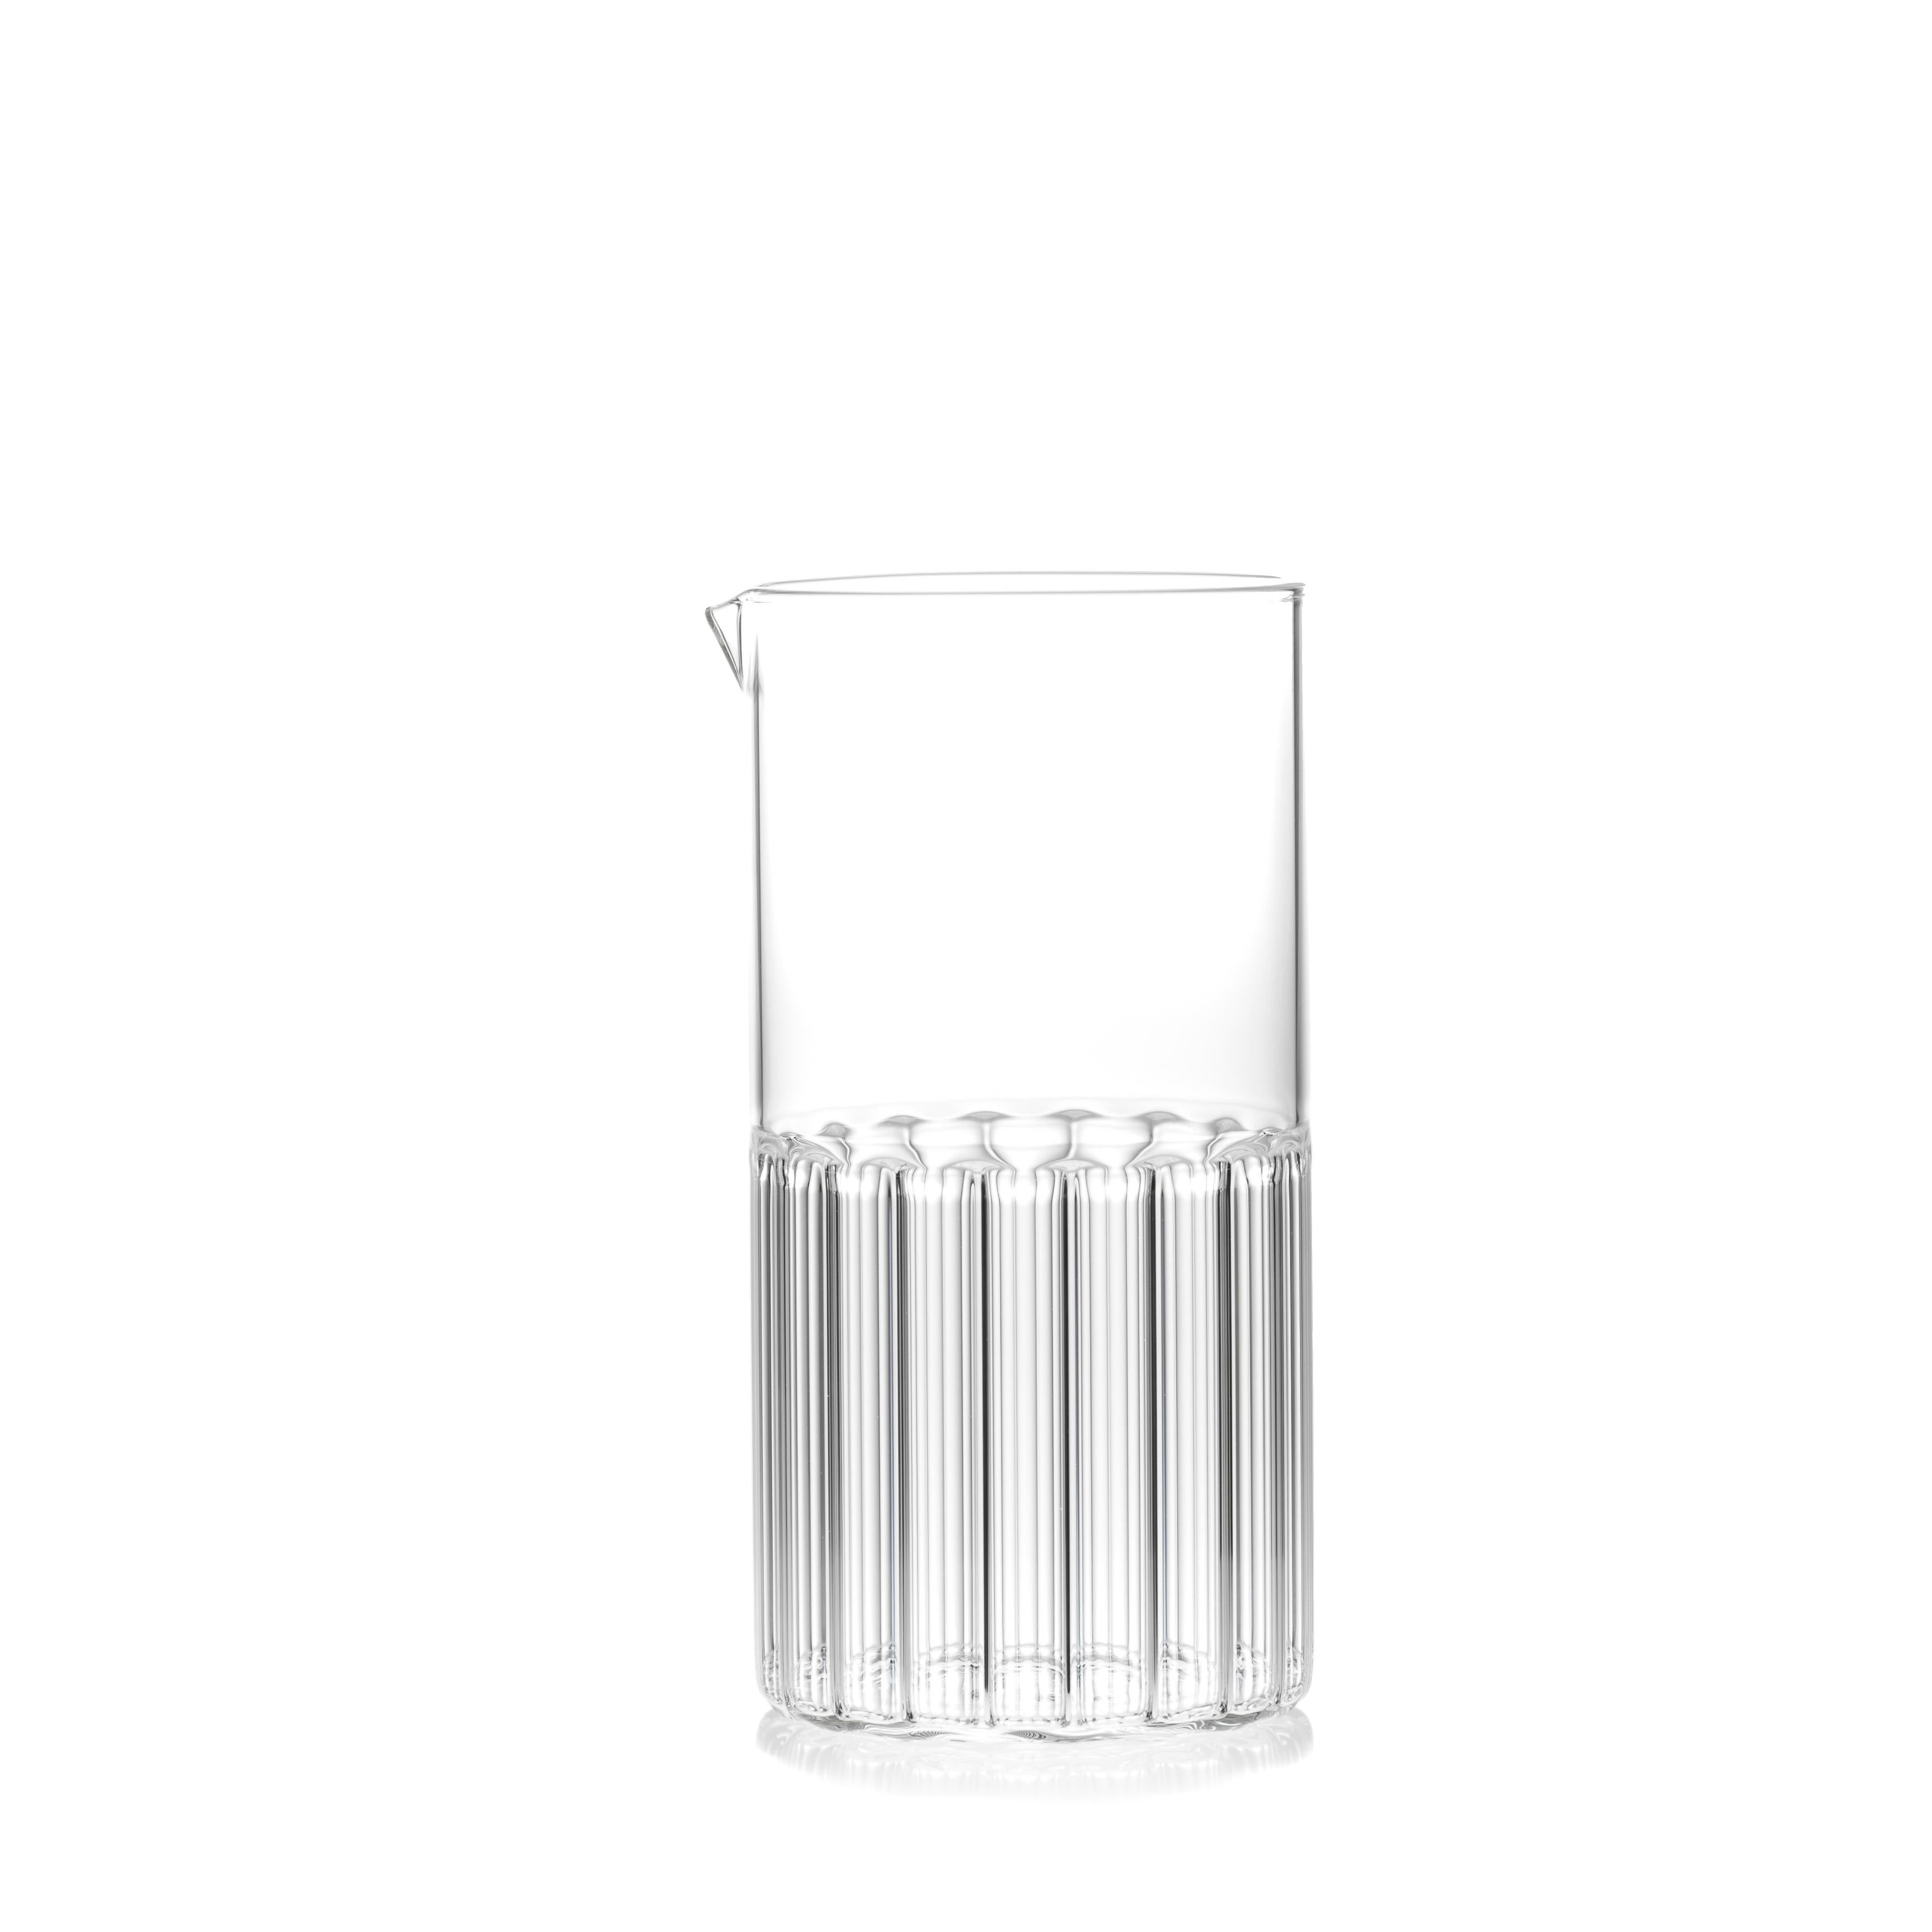 Bessho carafe with four sofia medium glasses

Just as the small town is known for the healing properties of its hot springs, so are the evenings we spend with good friends. The contemporary Bessho collection is elegant in its simplicity of modern